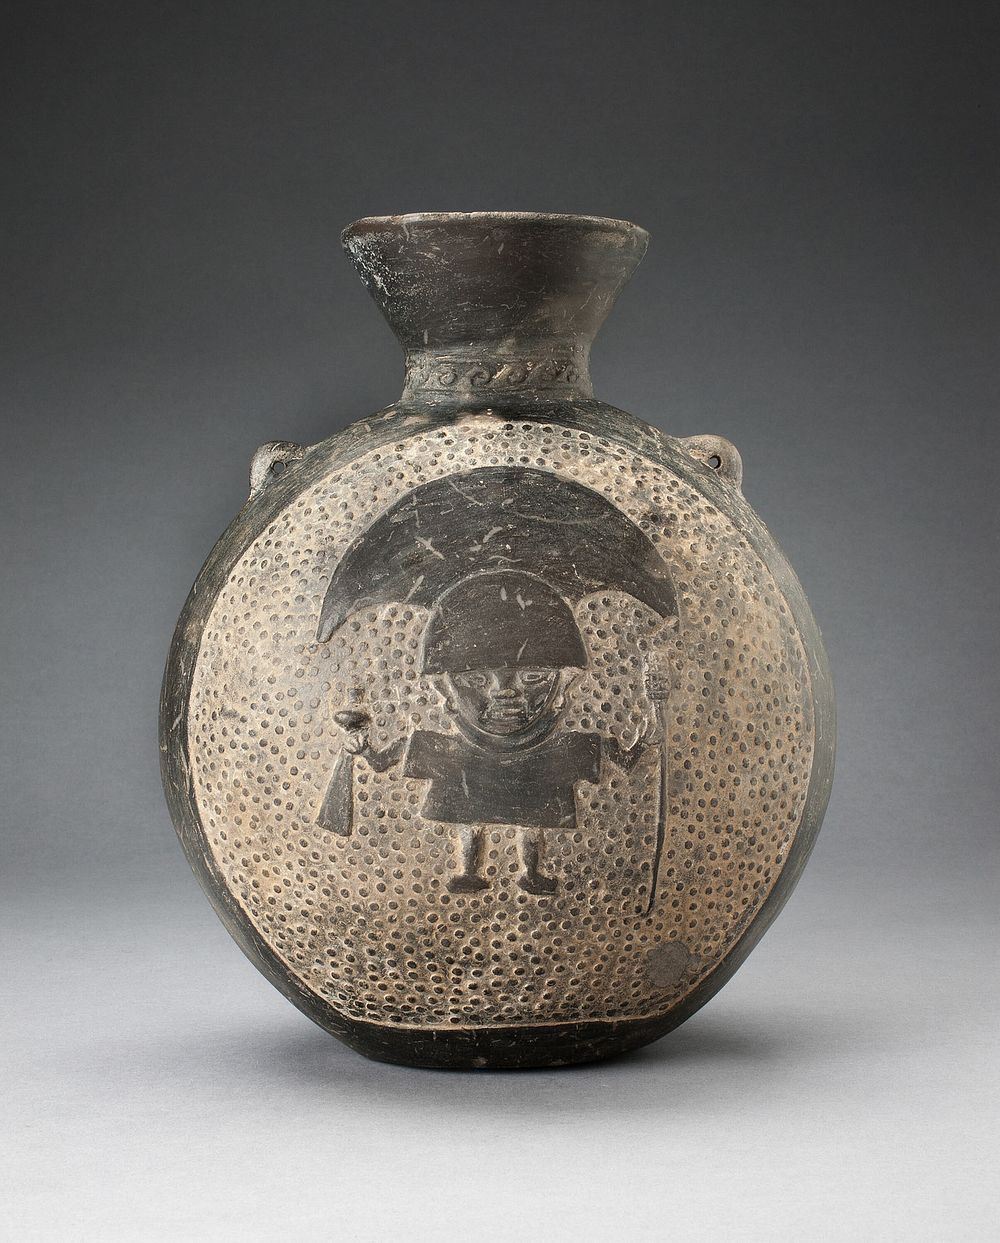 Jar with Relief of Standing Figure with Crescent Headdress, Holding Ritual Objects by Chimú